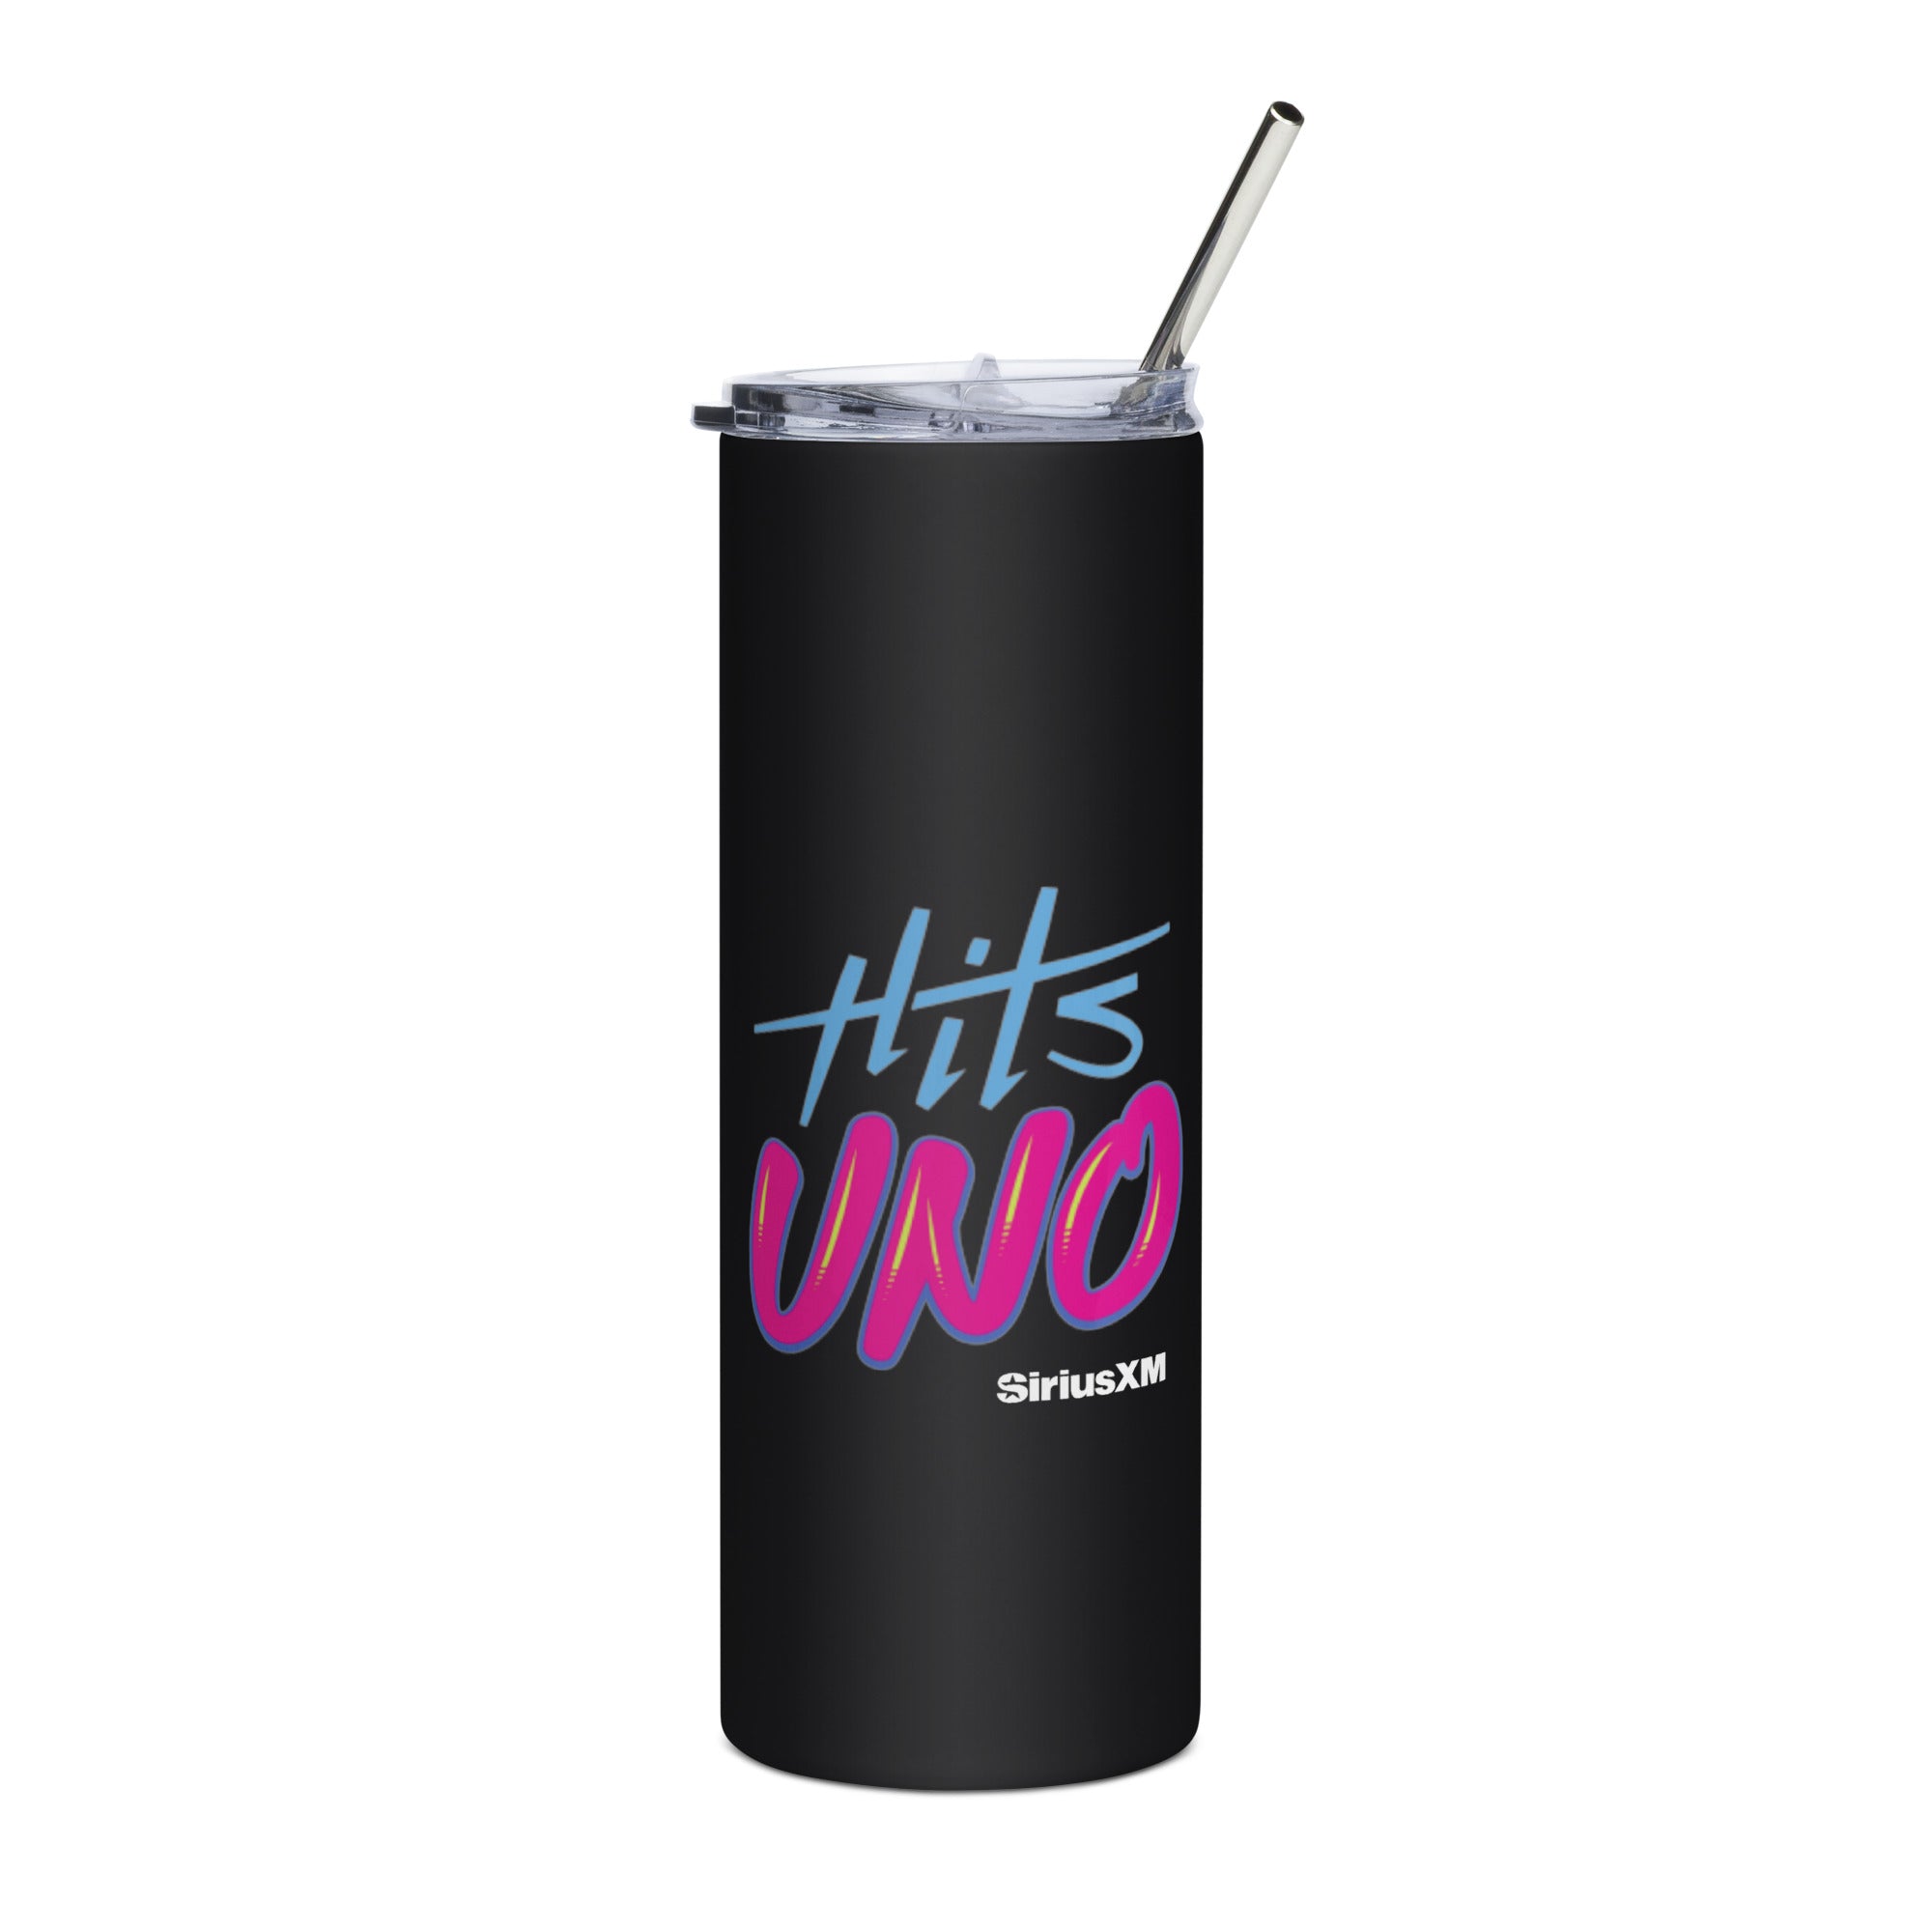 Hits Uno: Stainless Tumbler